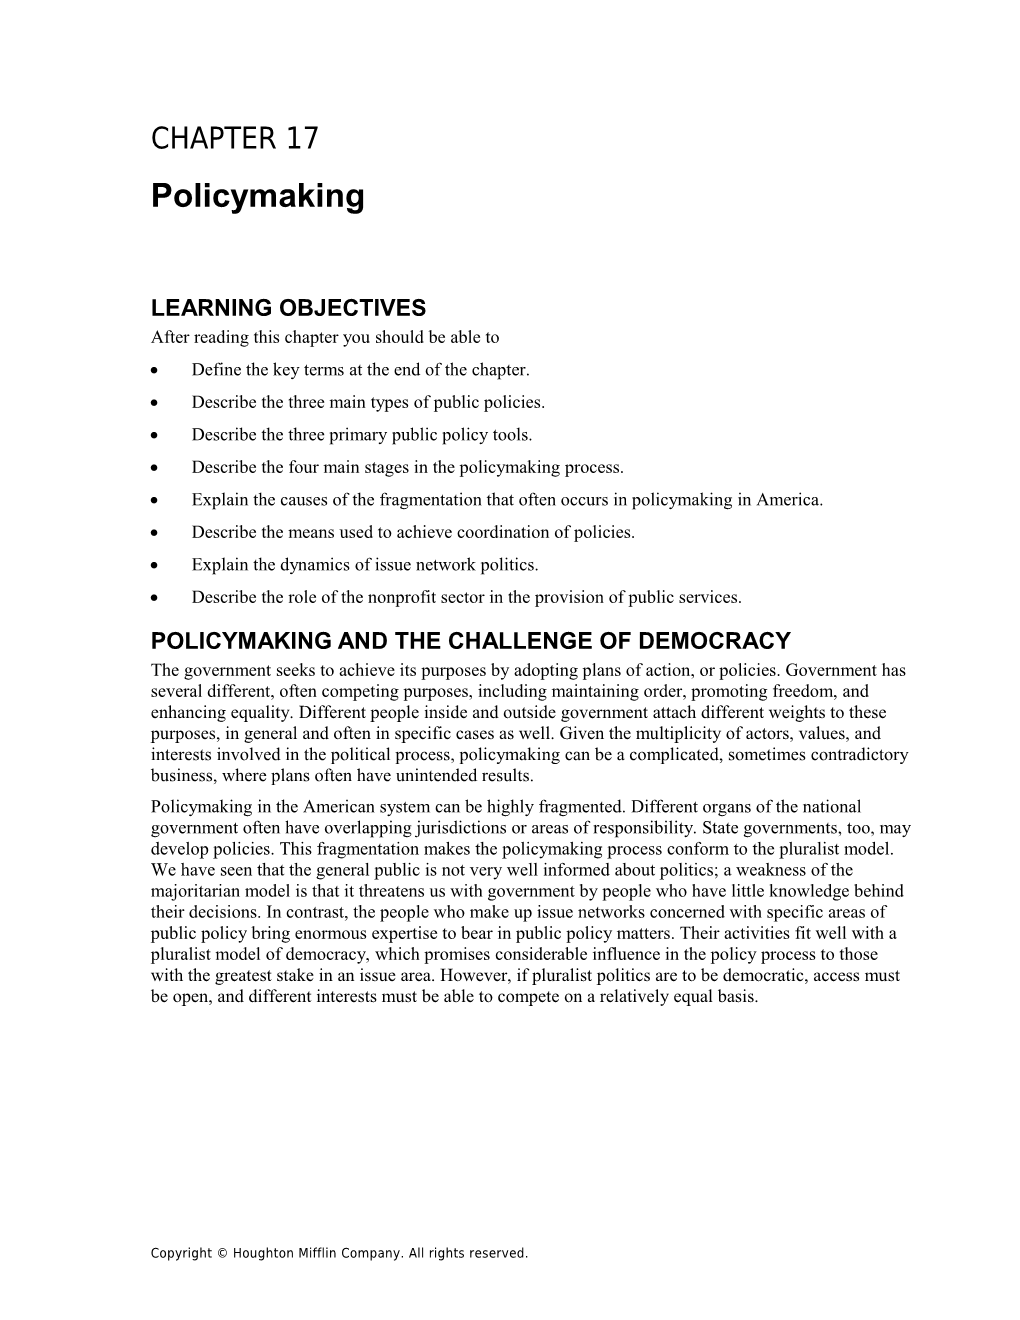 Chapter 17: Policymaking 1